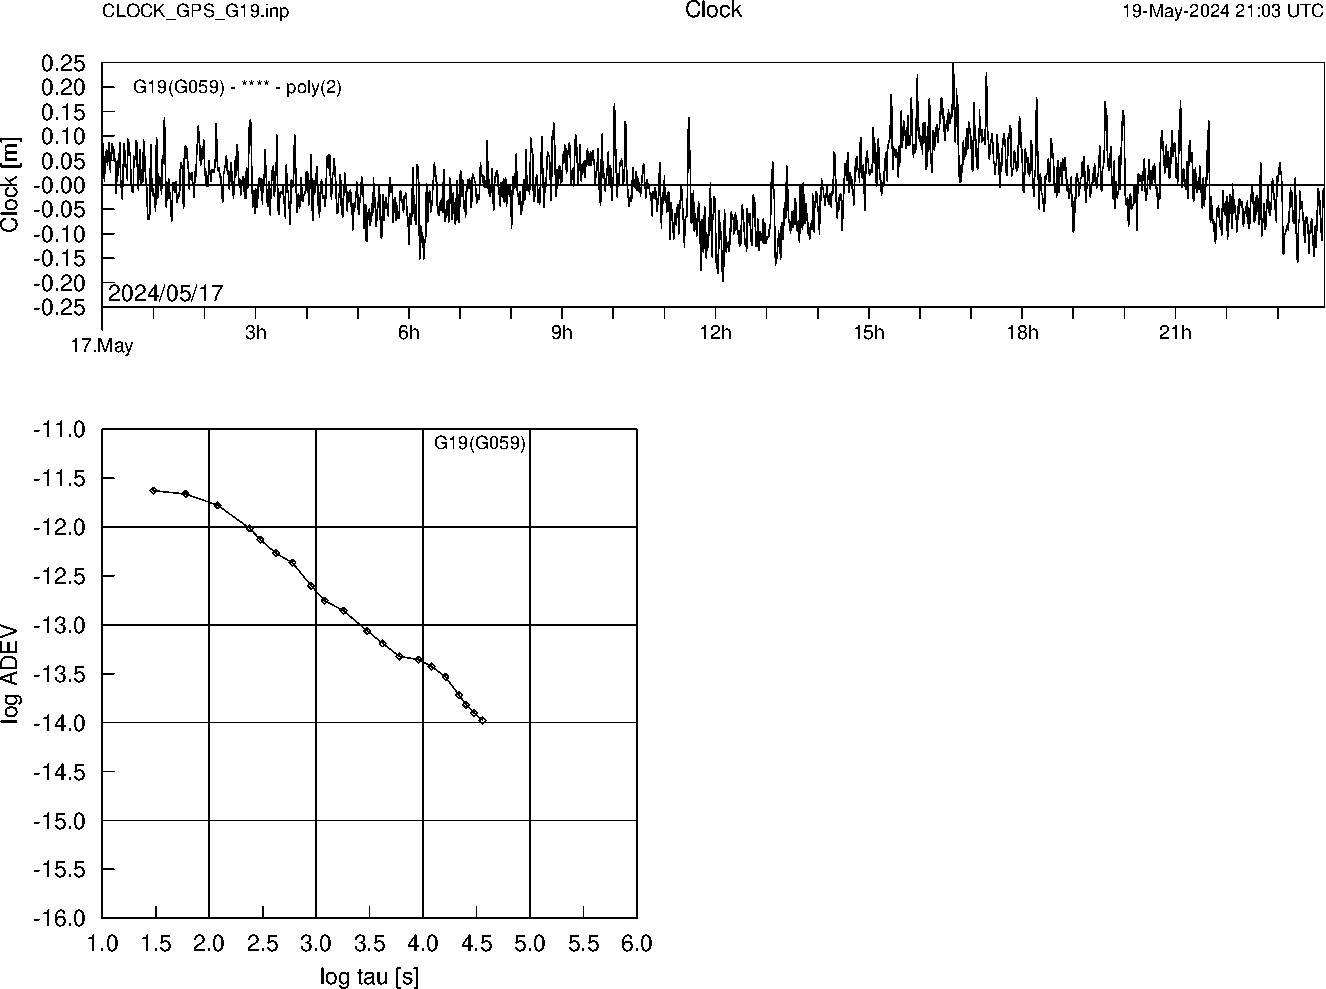 GPS G19 Clock Time Series and Allan Deviation